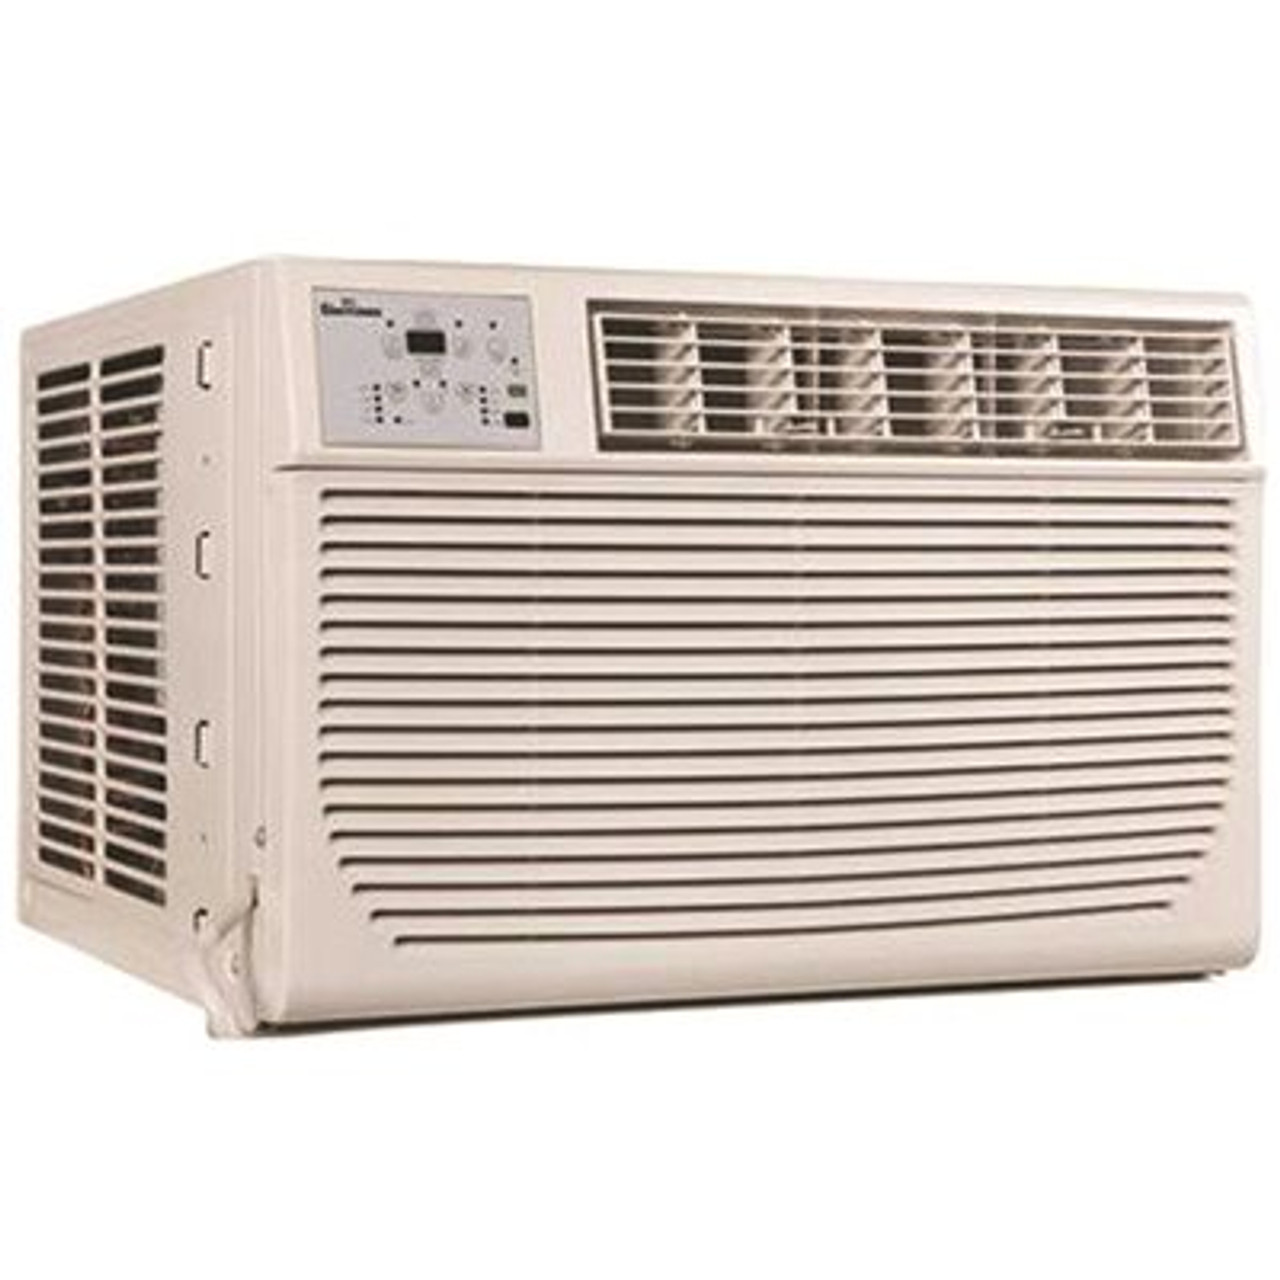 Private Brand Unbranded 12,000 Btu 230/208-Volt Window Air Conditioner With Heat For 550 Sq Ft In White